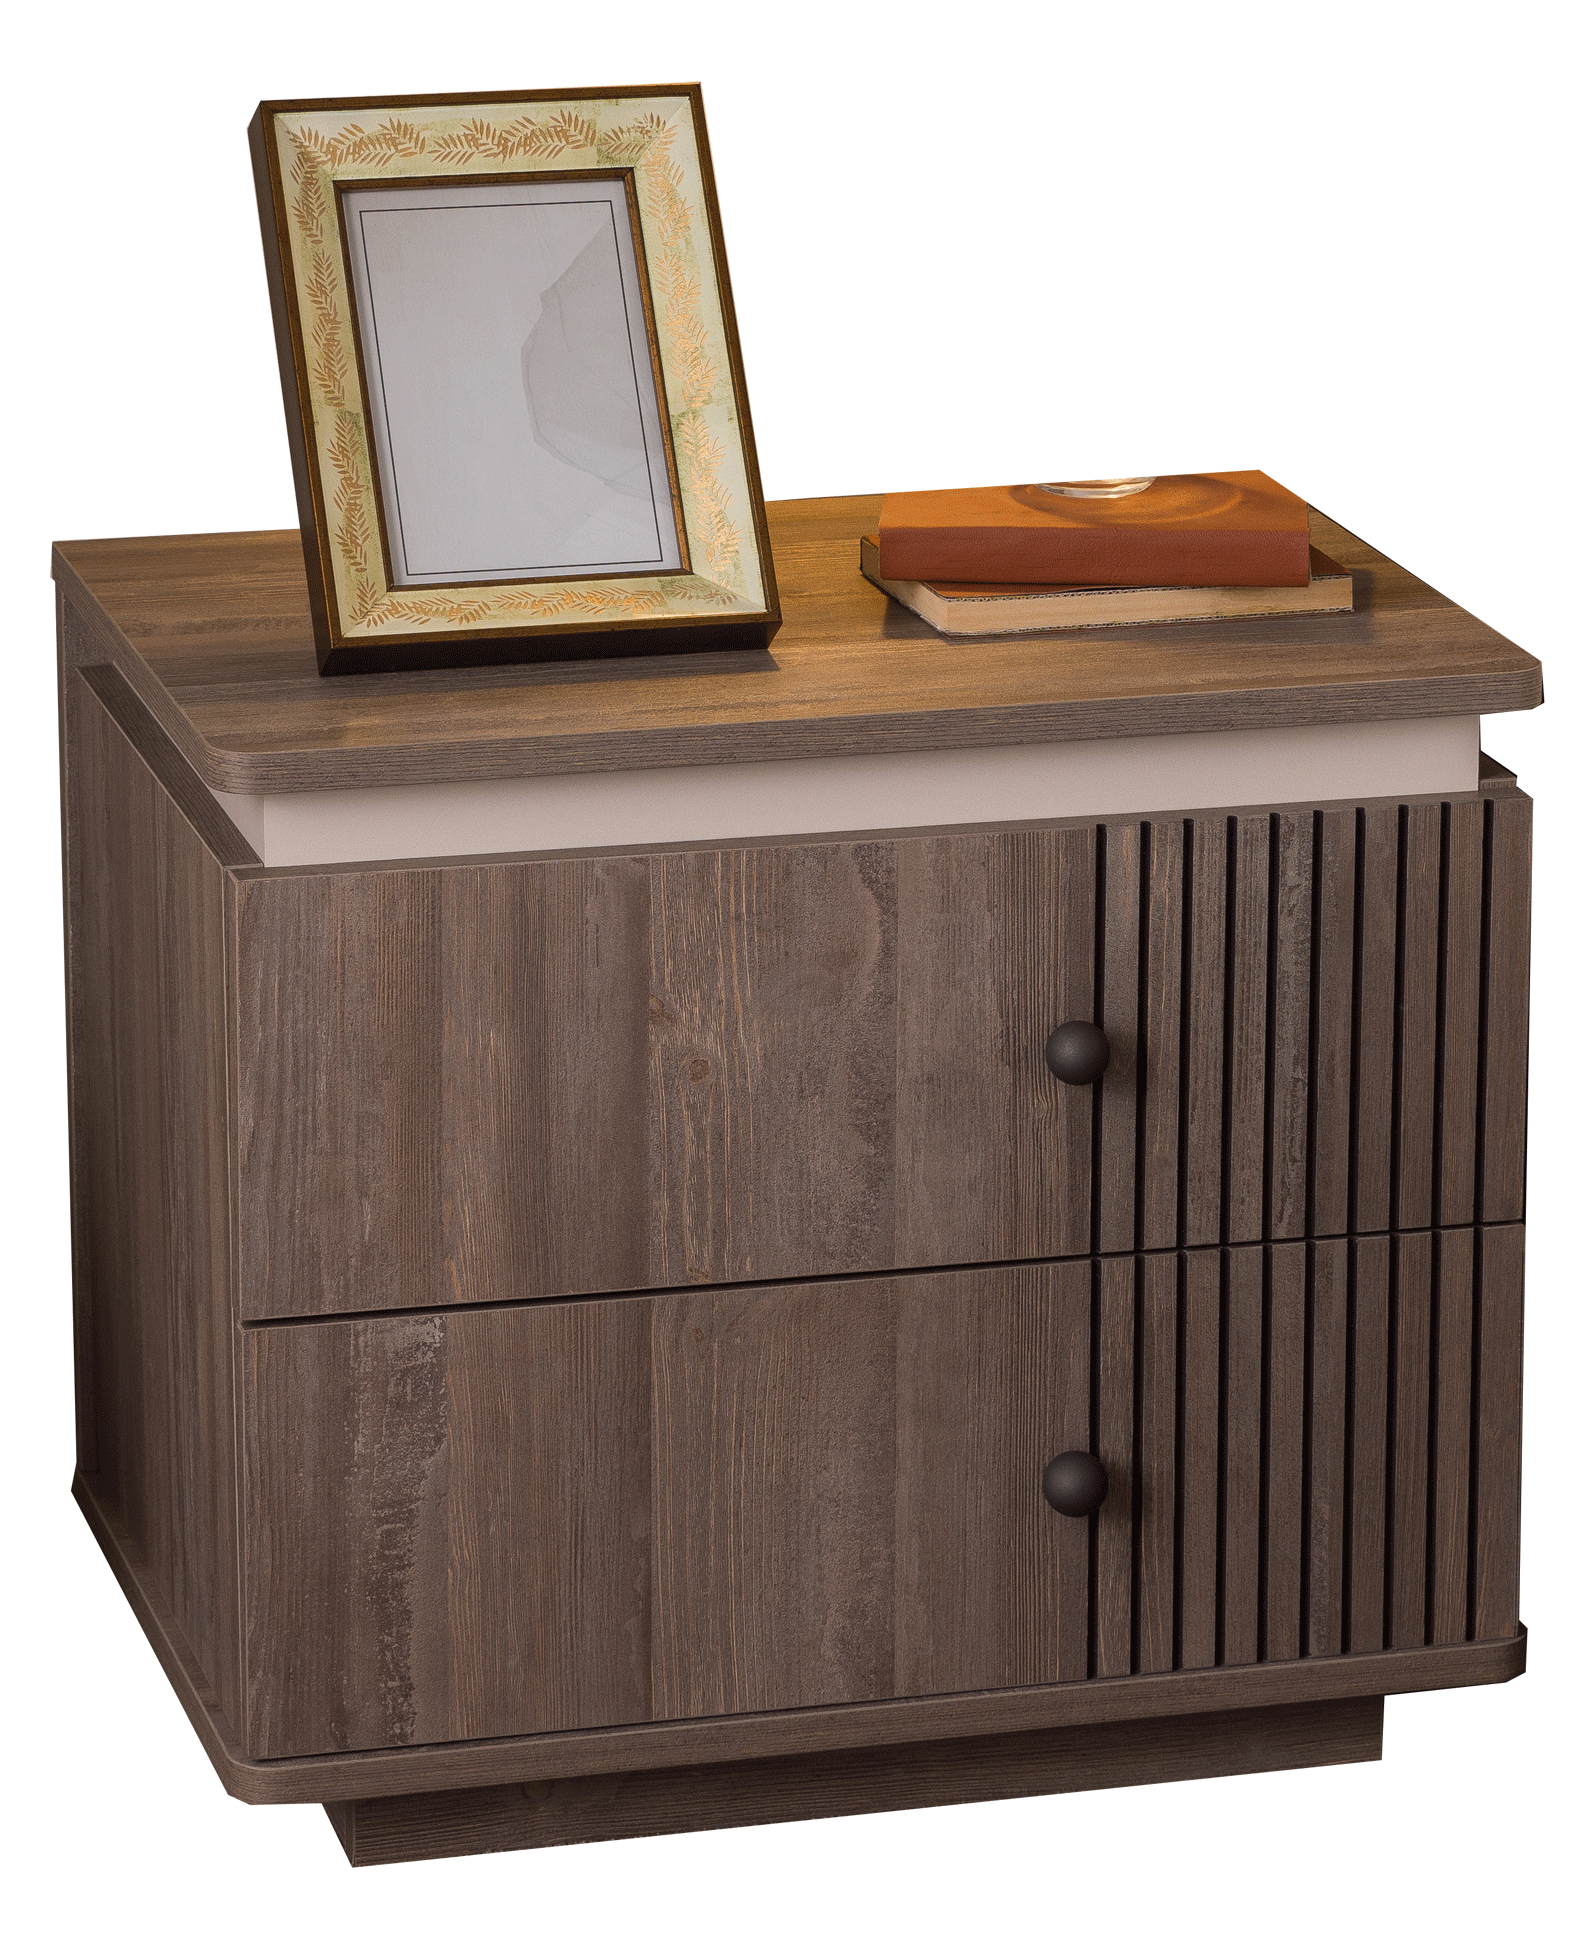 Bedroom Furniture Beds with storage Elvis Nightstands- SOLD AS COMPLETE BEDGROUP ONLY